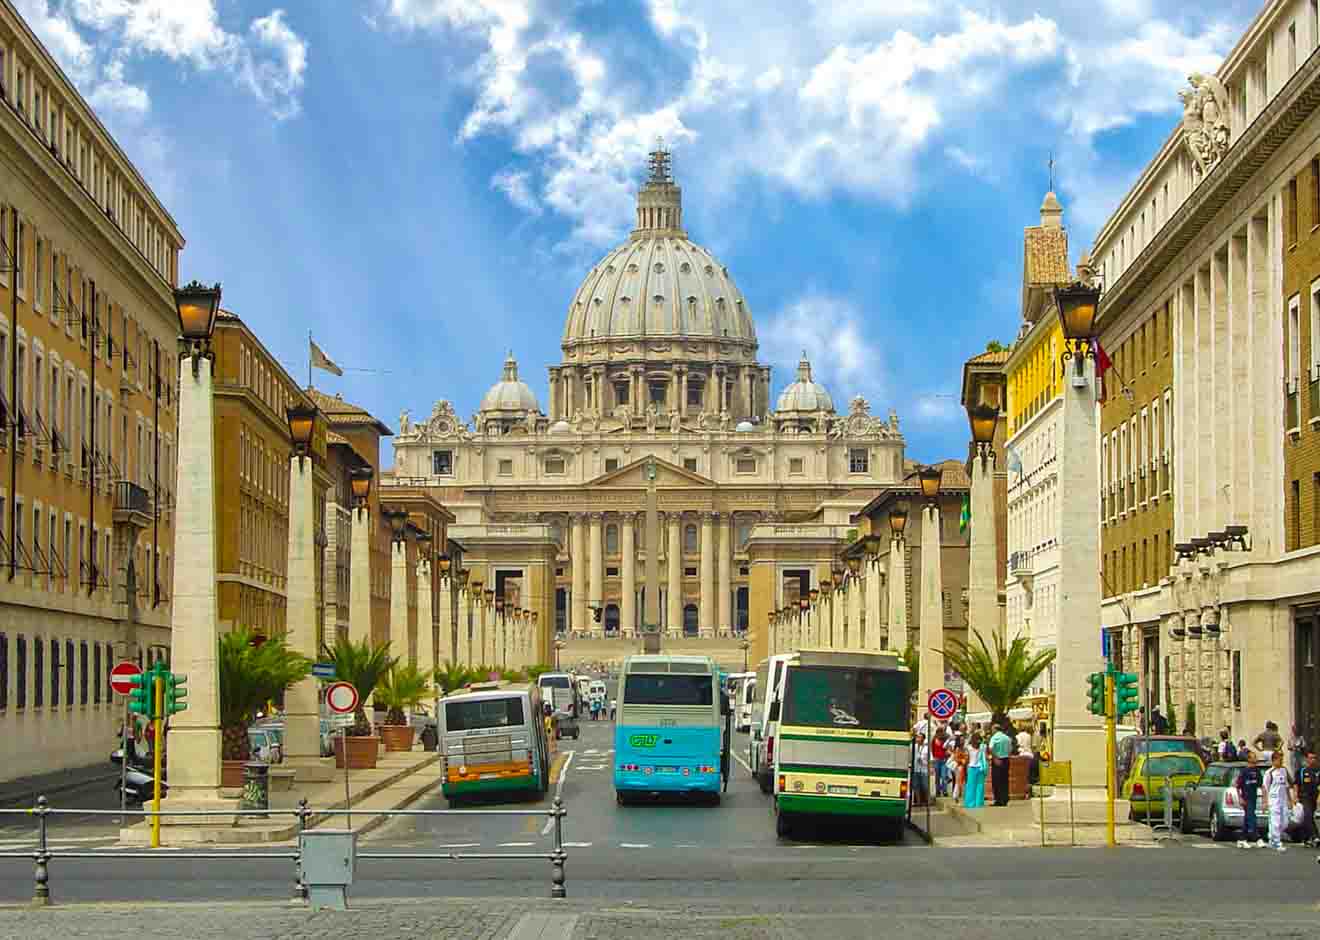 Saint Peter’s Basilica in Rome, Italy How To Avoid The Lines St Peters Basilica Tickets rome bus